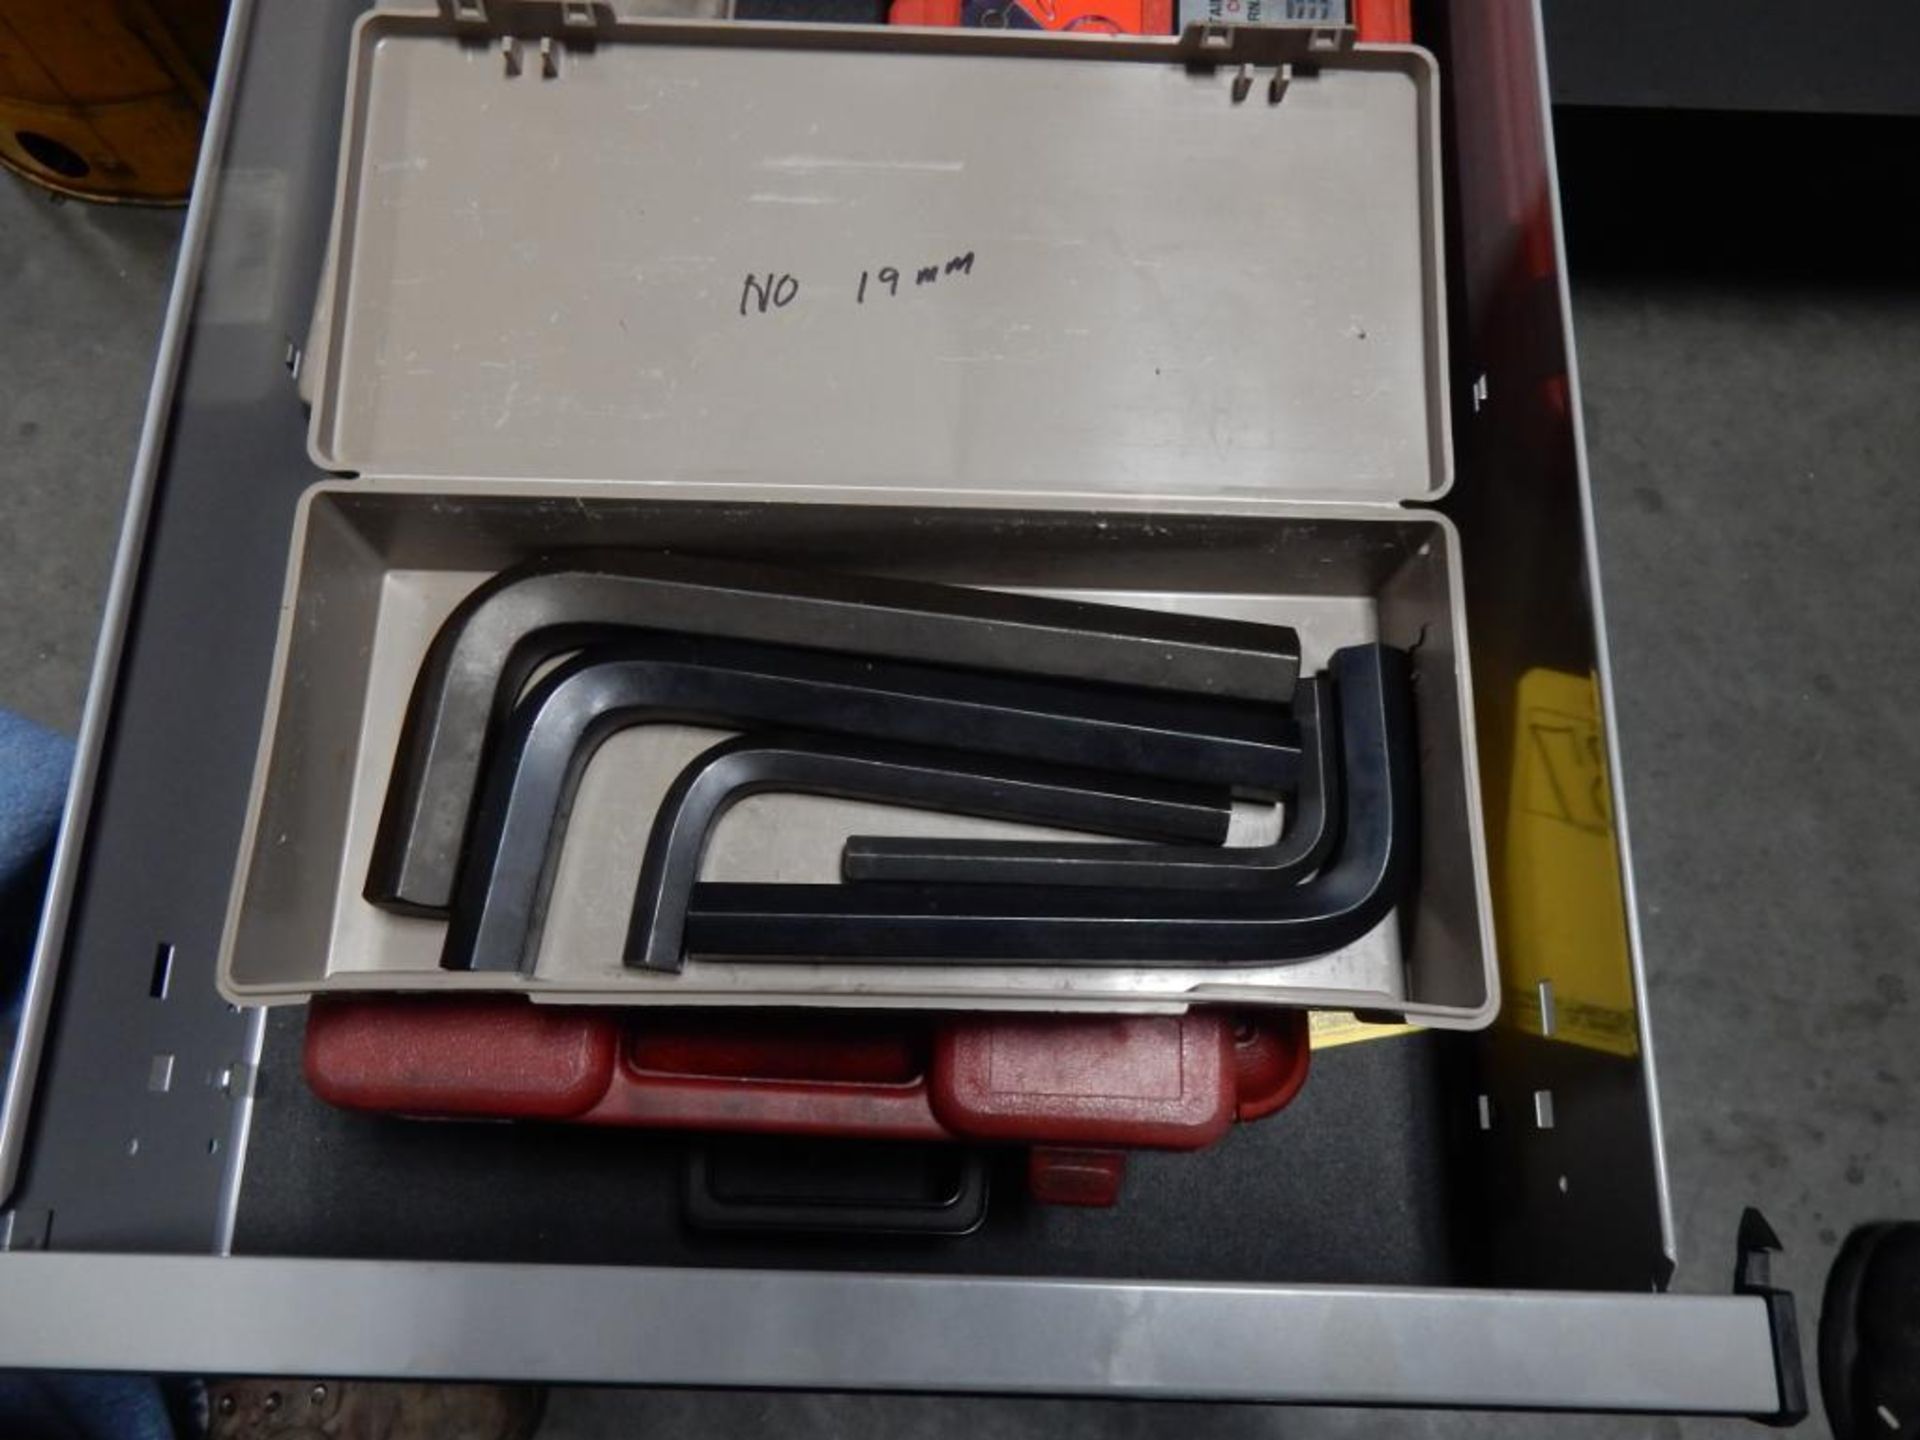 CONTENTS OF DRAWER - MAC SNAP RING PLYERS, PROTO SNAP RING PLYERS, PULLERS, HEX KEYS, ETC. - Image 5 of 6